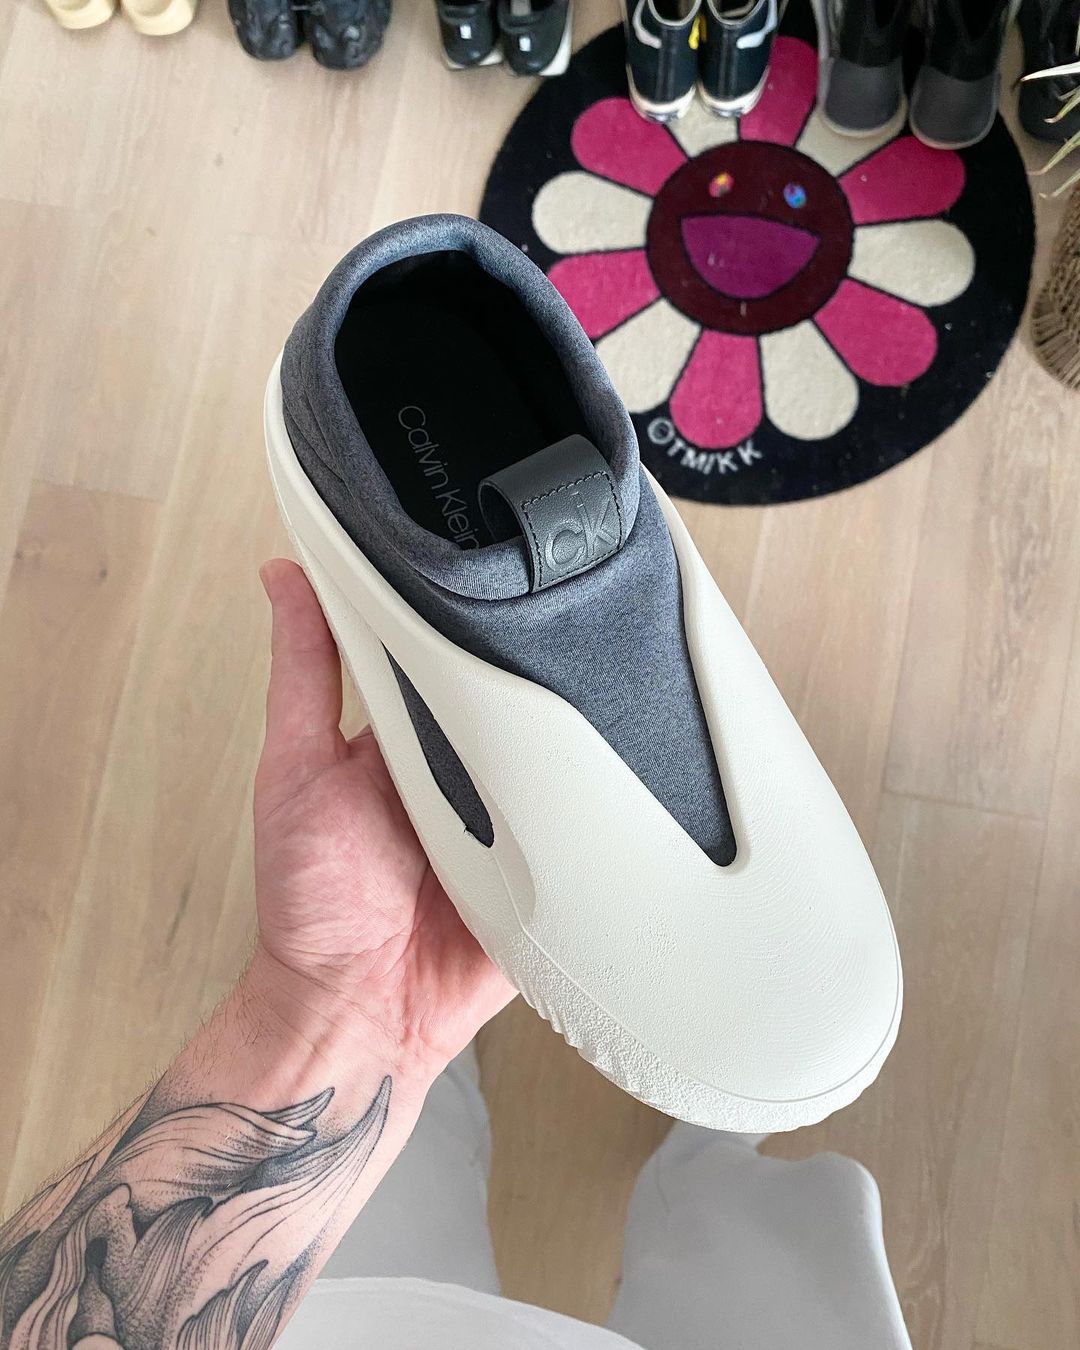 Ud Bloom kølig Images of Pending Calvin Klein x Heron Preston 3D Printed Trainers Surface  Online – PAUSE Online | Men's Fashion, Street Style, Fashion News &  Streetwear